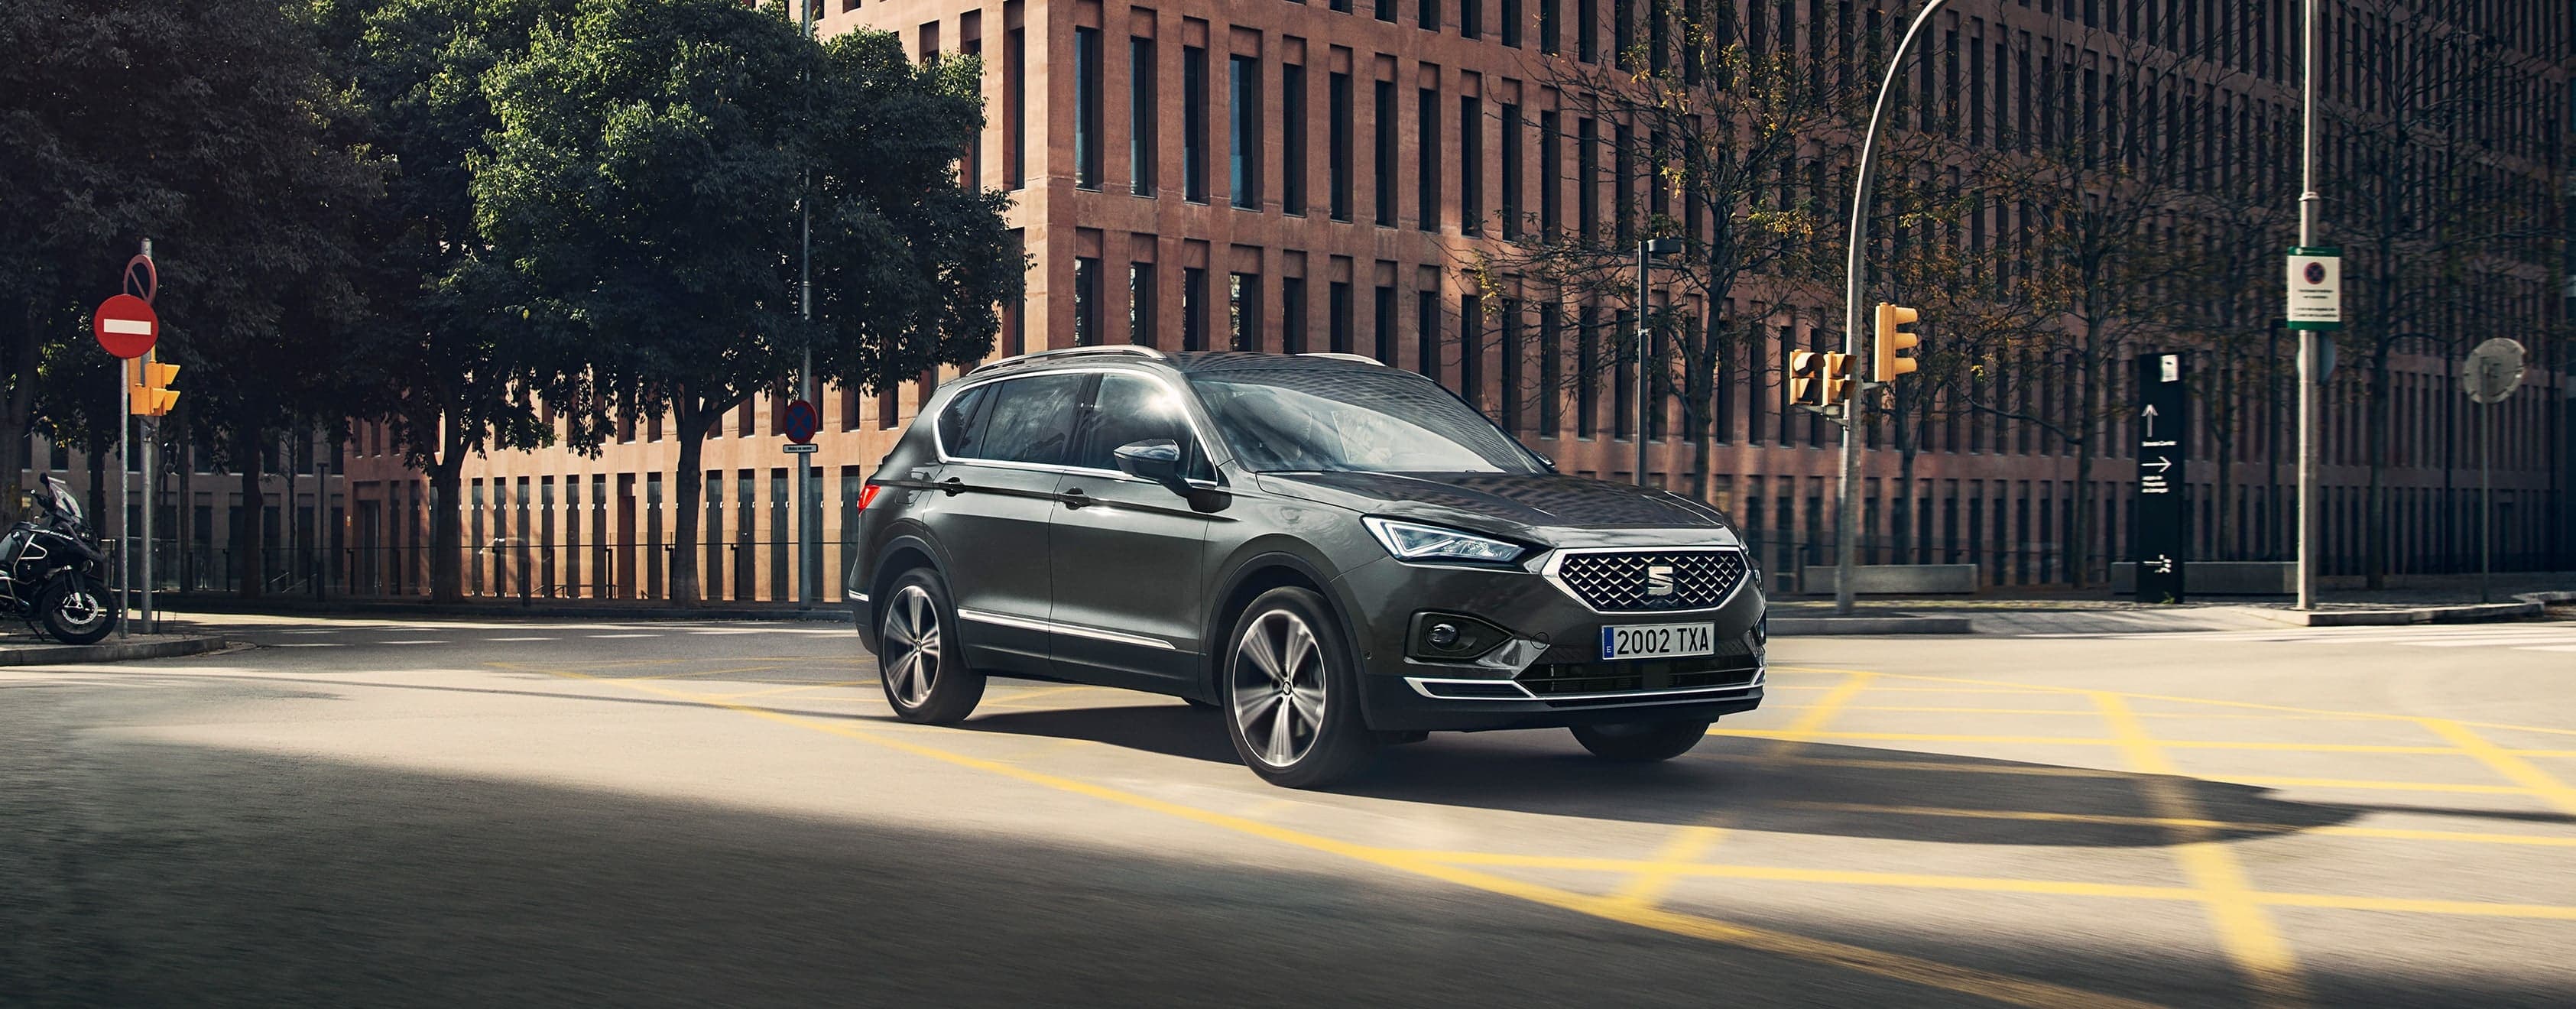 SEAT Tarraco SUV 7 seater front view of car 